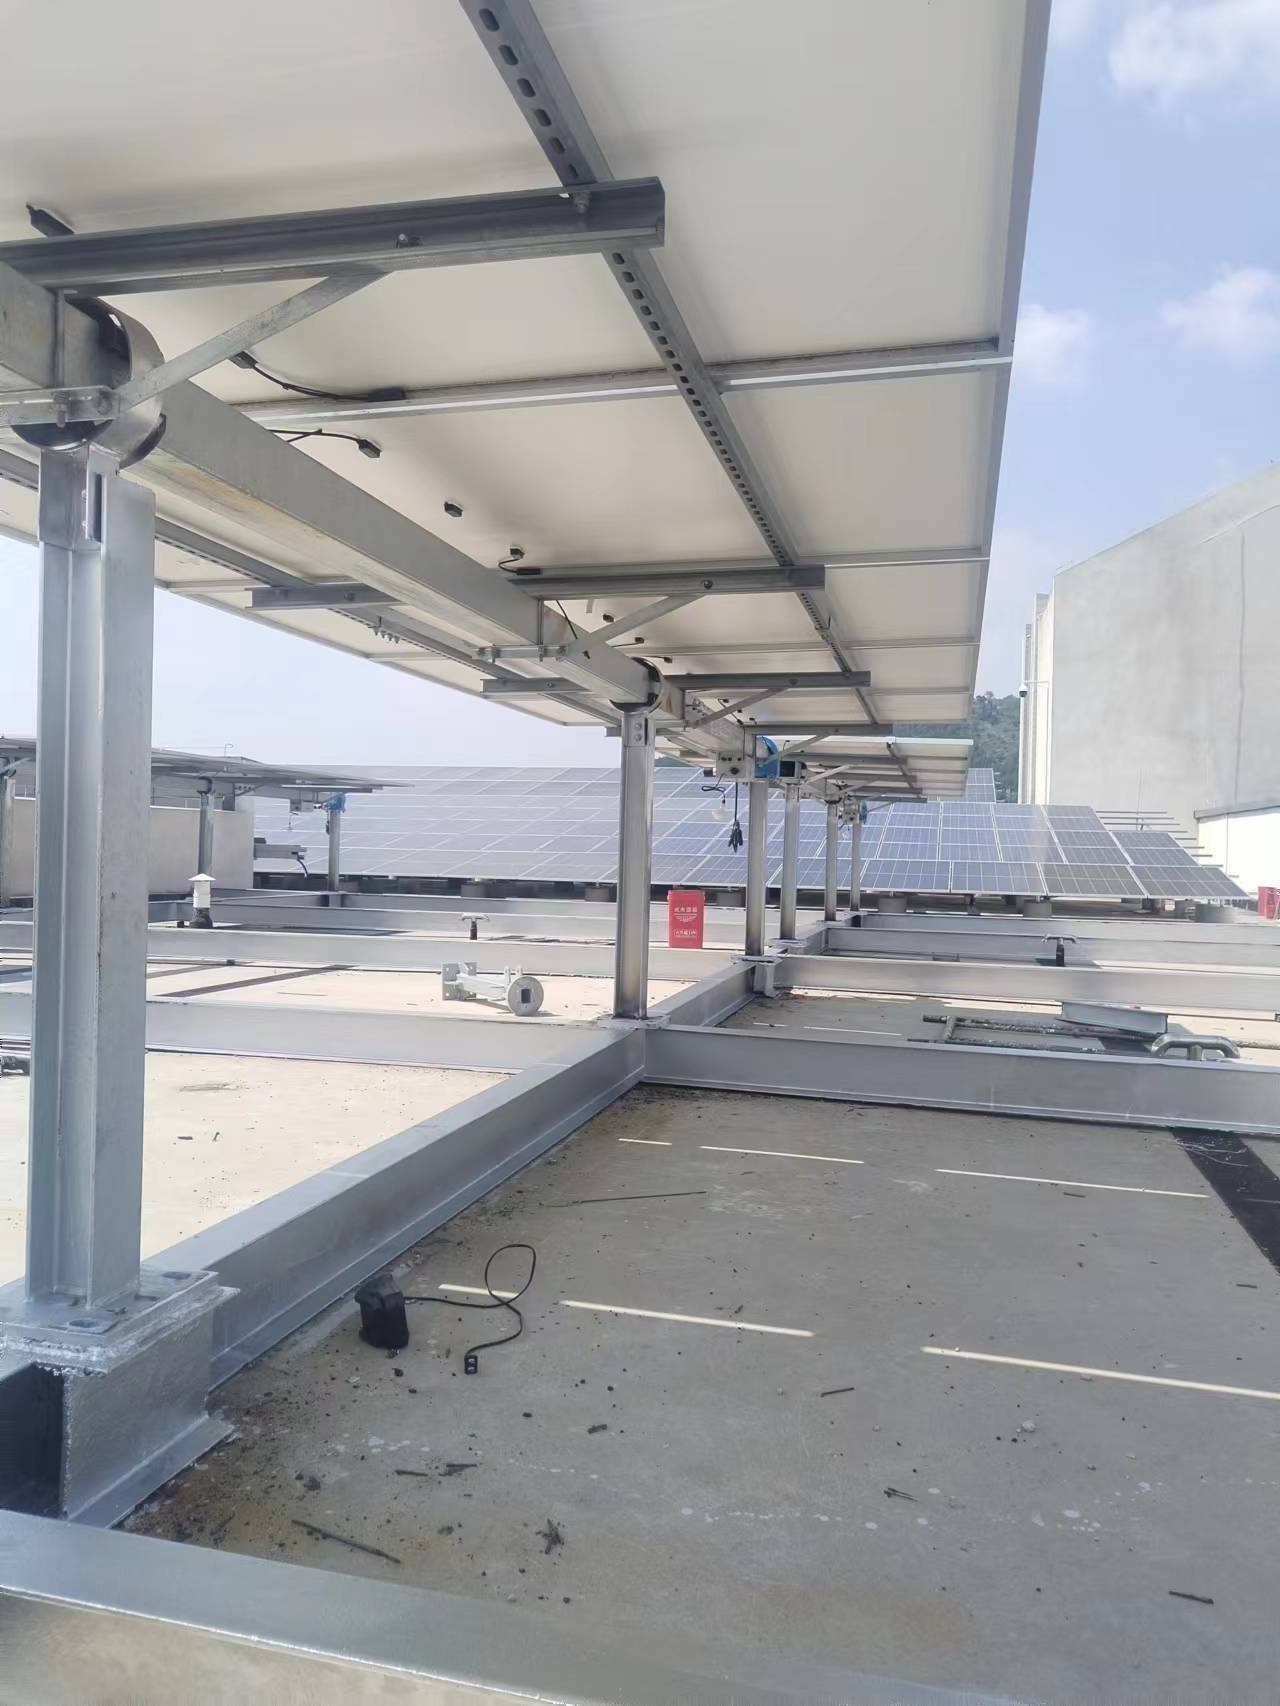 Advantages and application scenarios of rooftop flat single-axis tracking photovoltaic brackets